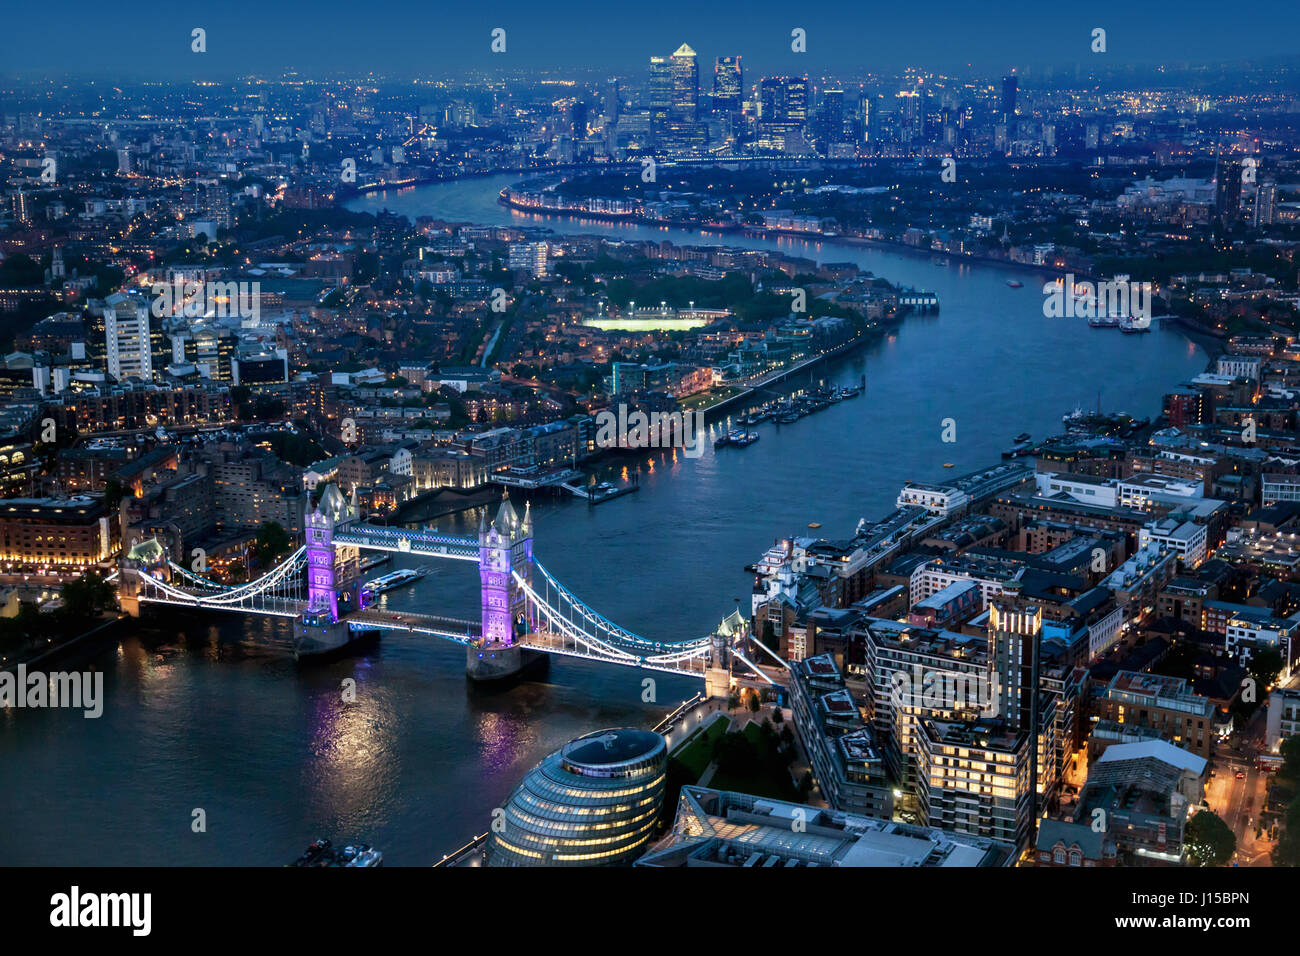 Aerial view over London at night with Tower Bridge. Stock Photo